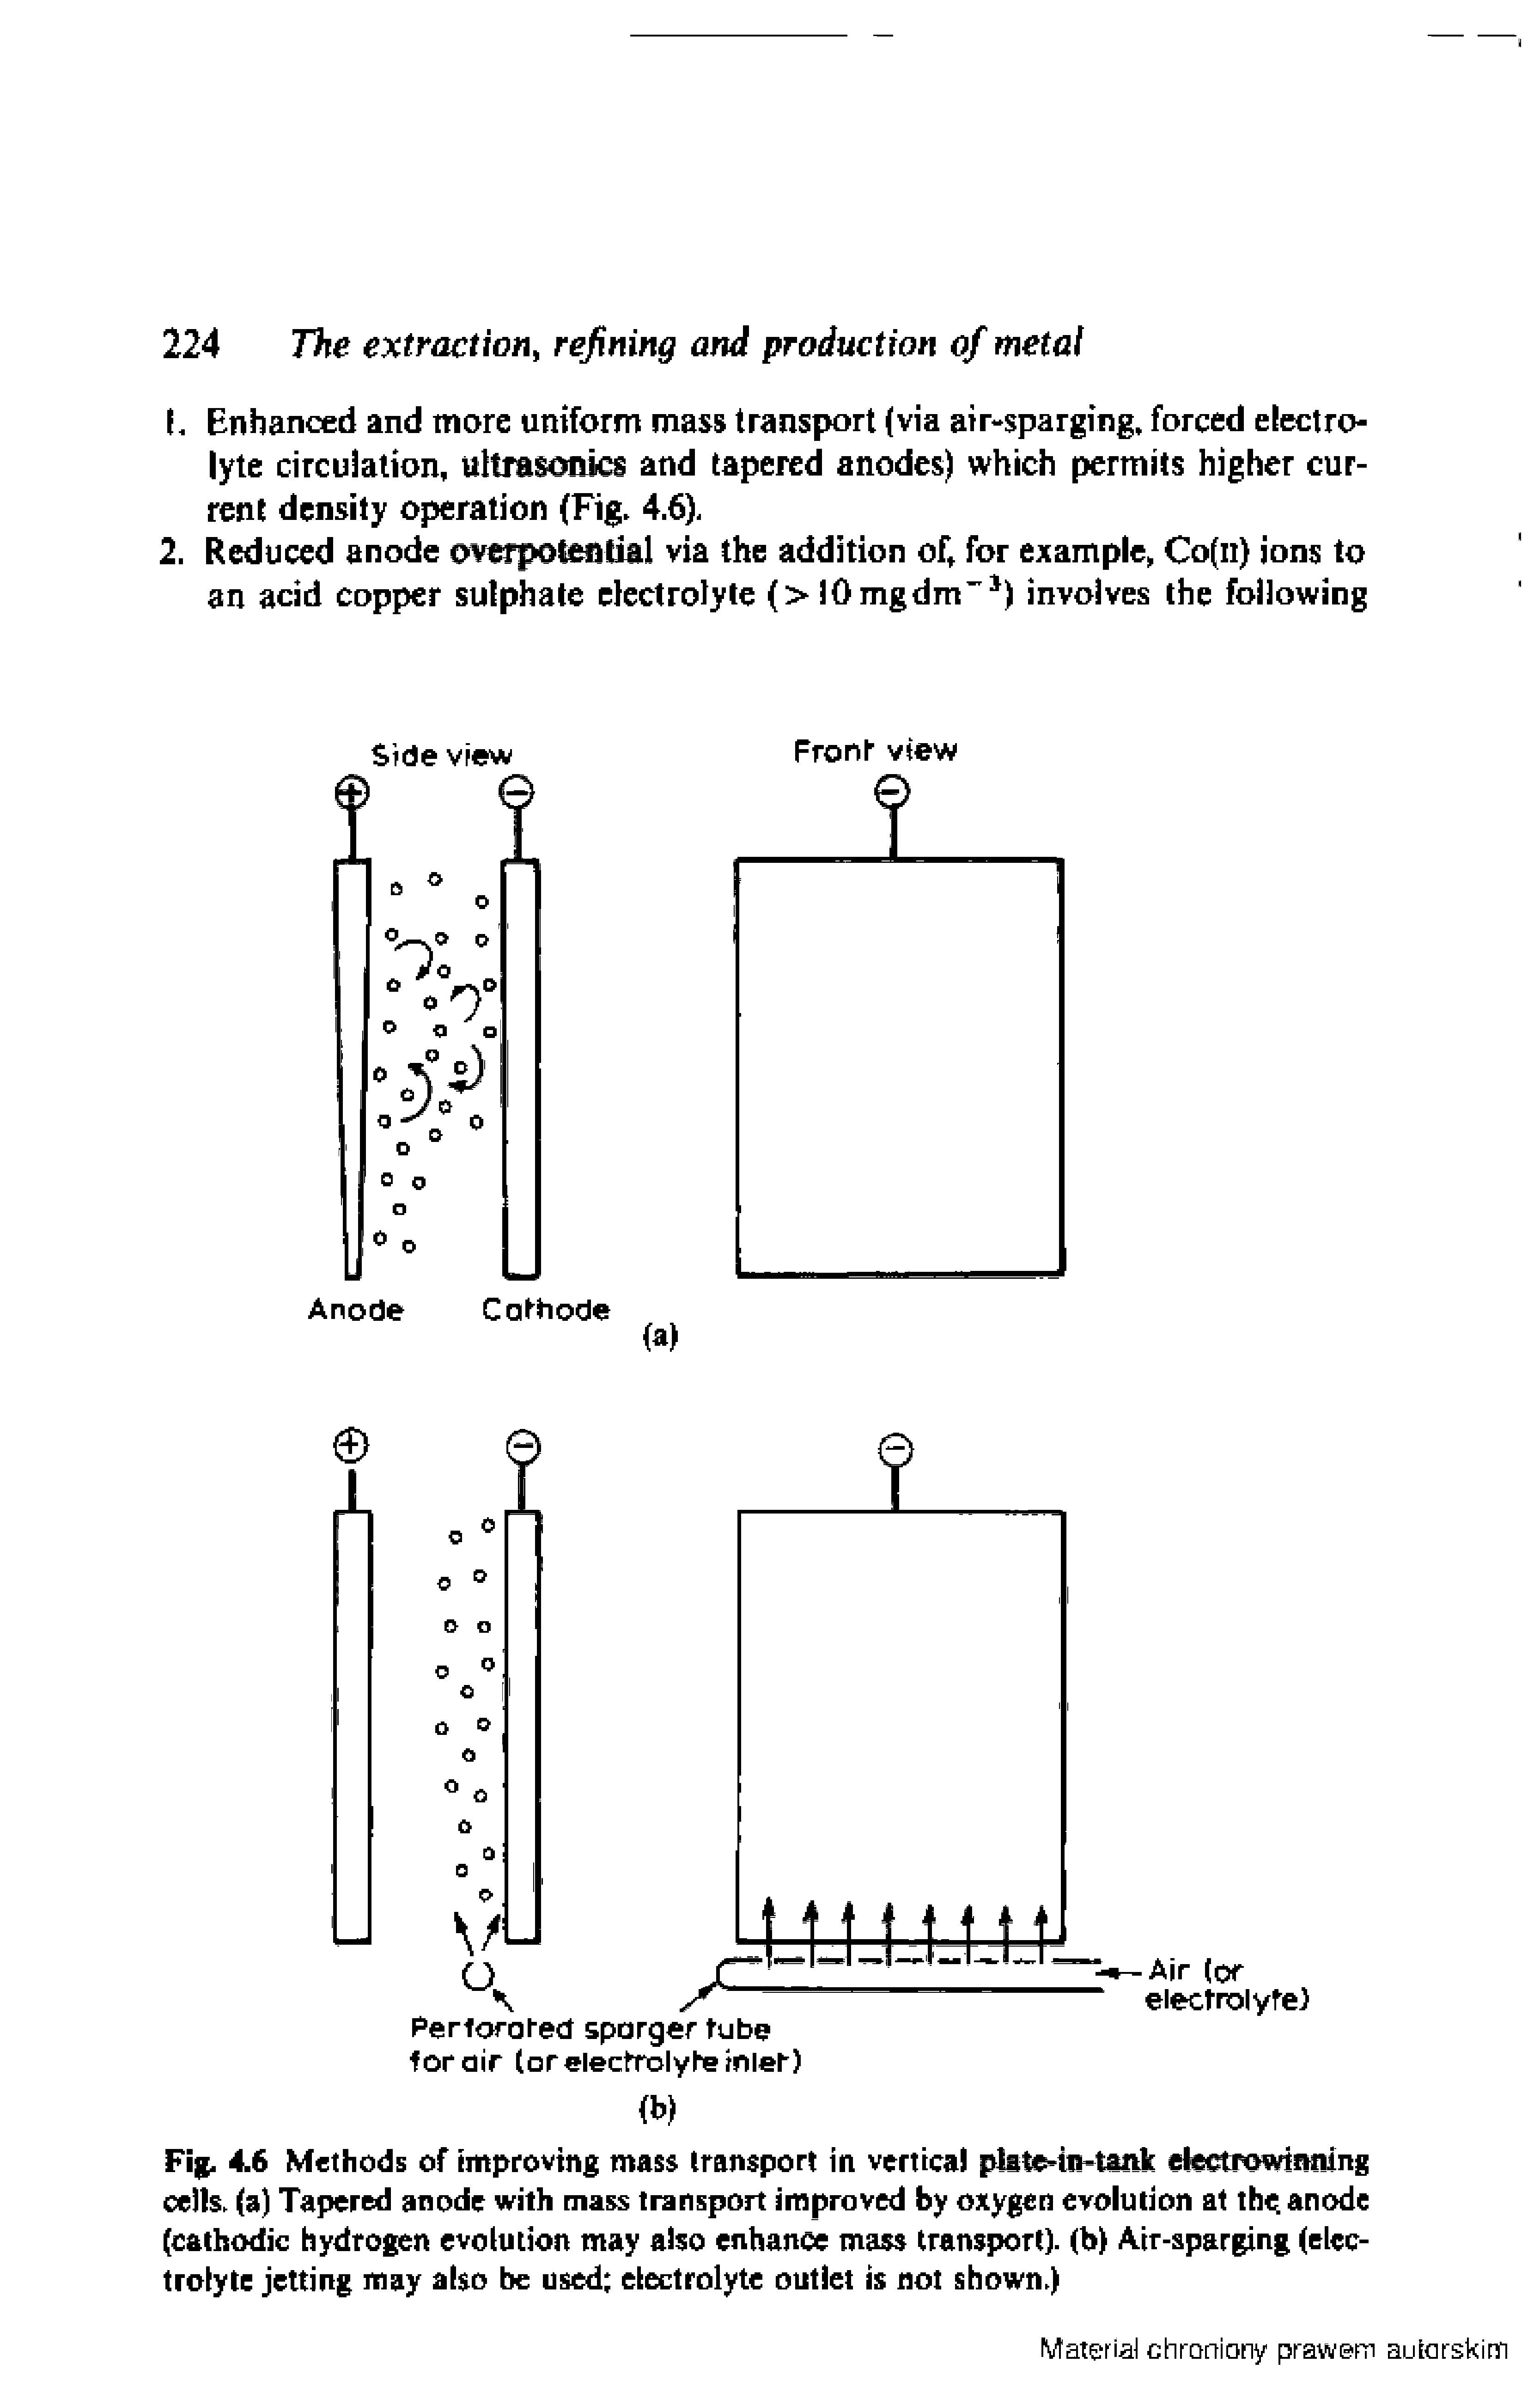 Fig. 4.6 Methods of improving mass transport in vertical plite-iiHtafik ele rowiiifting cells, (a) Tapered anode with mass transport improved by oxygen evolution at th anode (cathodic hydrogen evolution may also enhance mass transport), (b) Air-sparging (electrolyte jetting may algo be used electrolyte outlet is not shown.)...